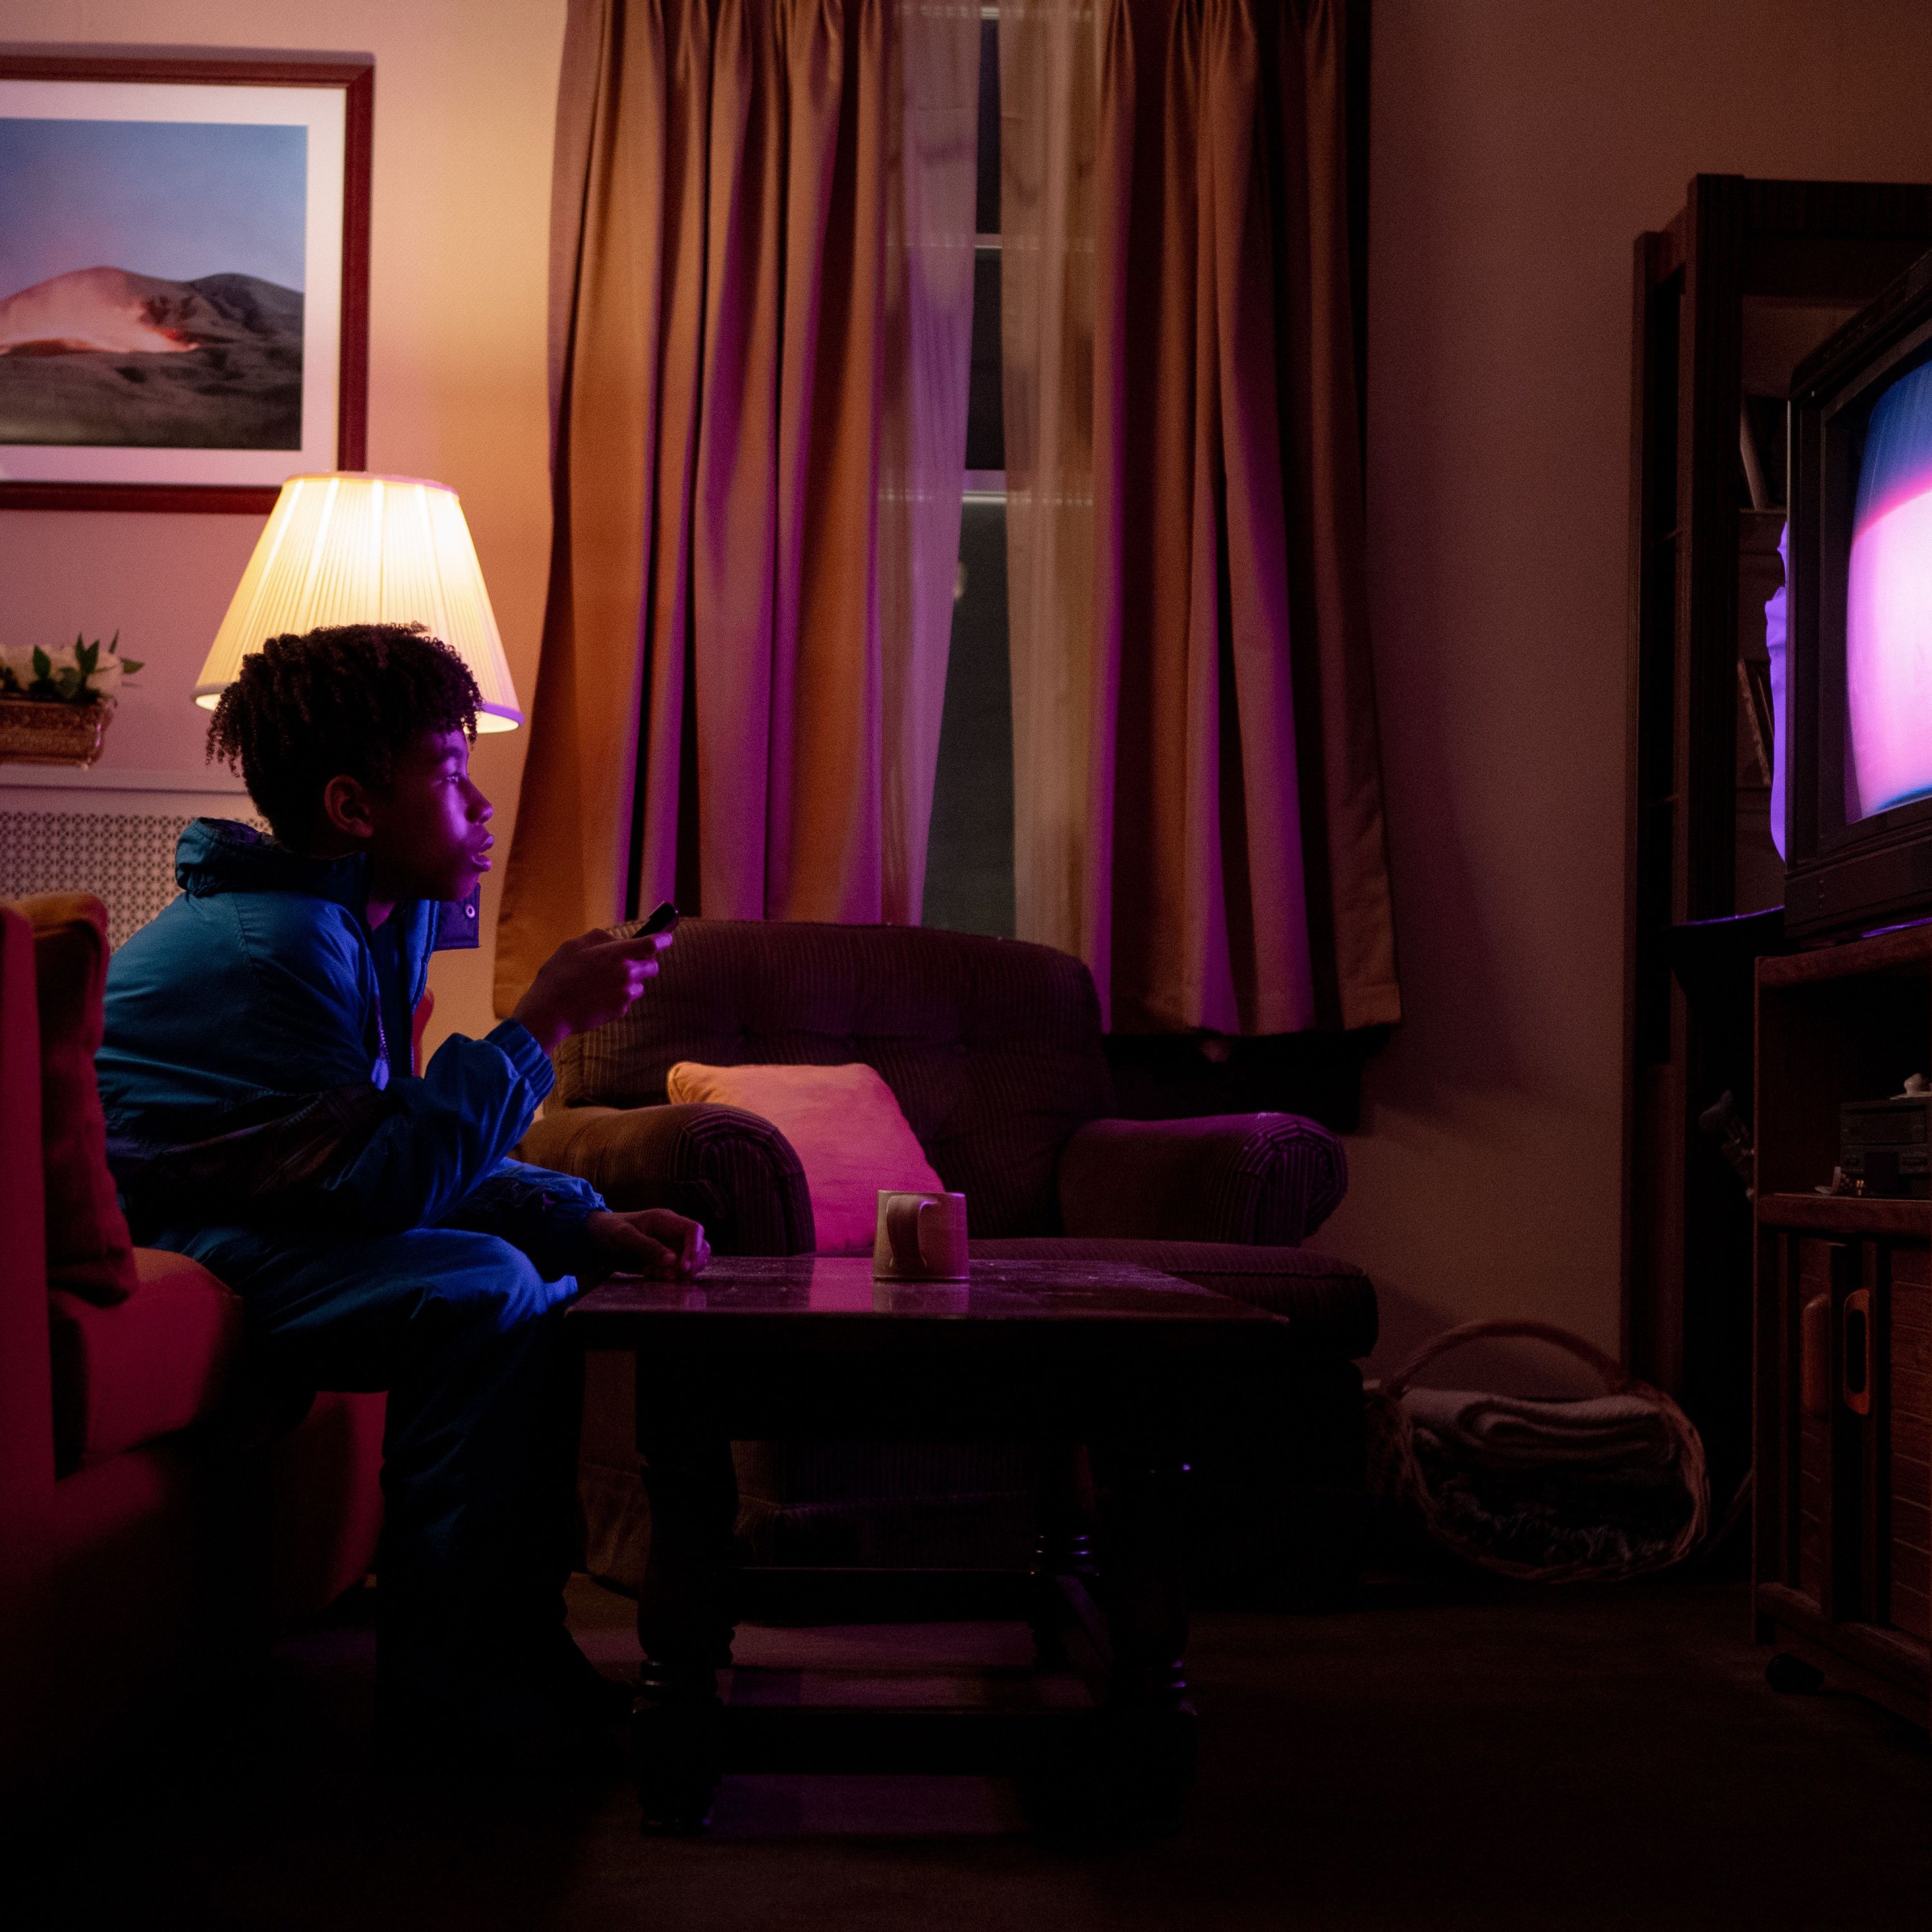 I Saw the TV Glow: Actor watches The Pink Opaque TV show